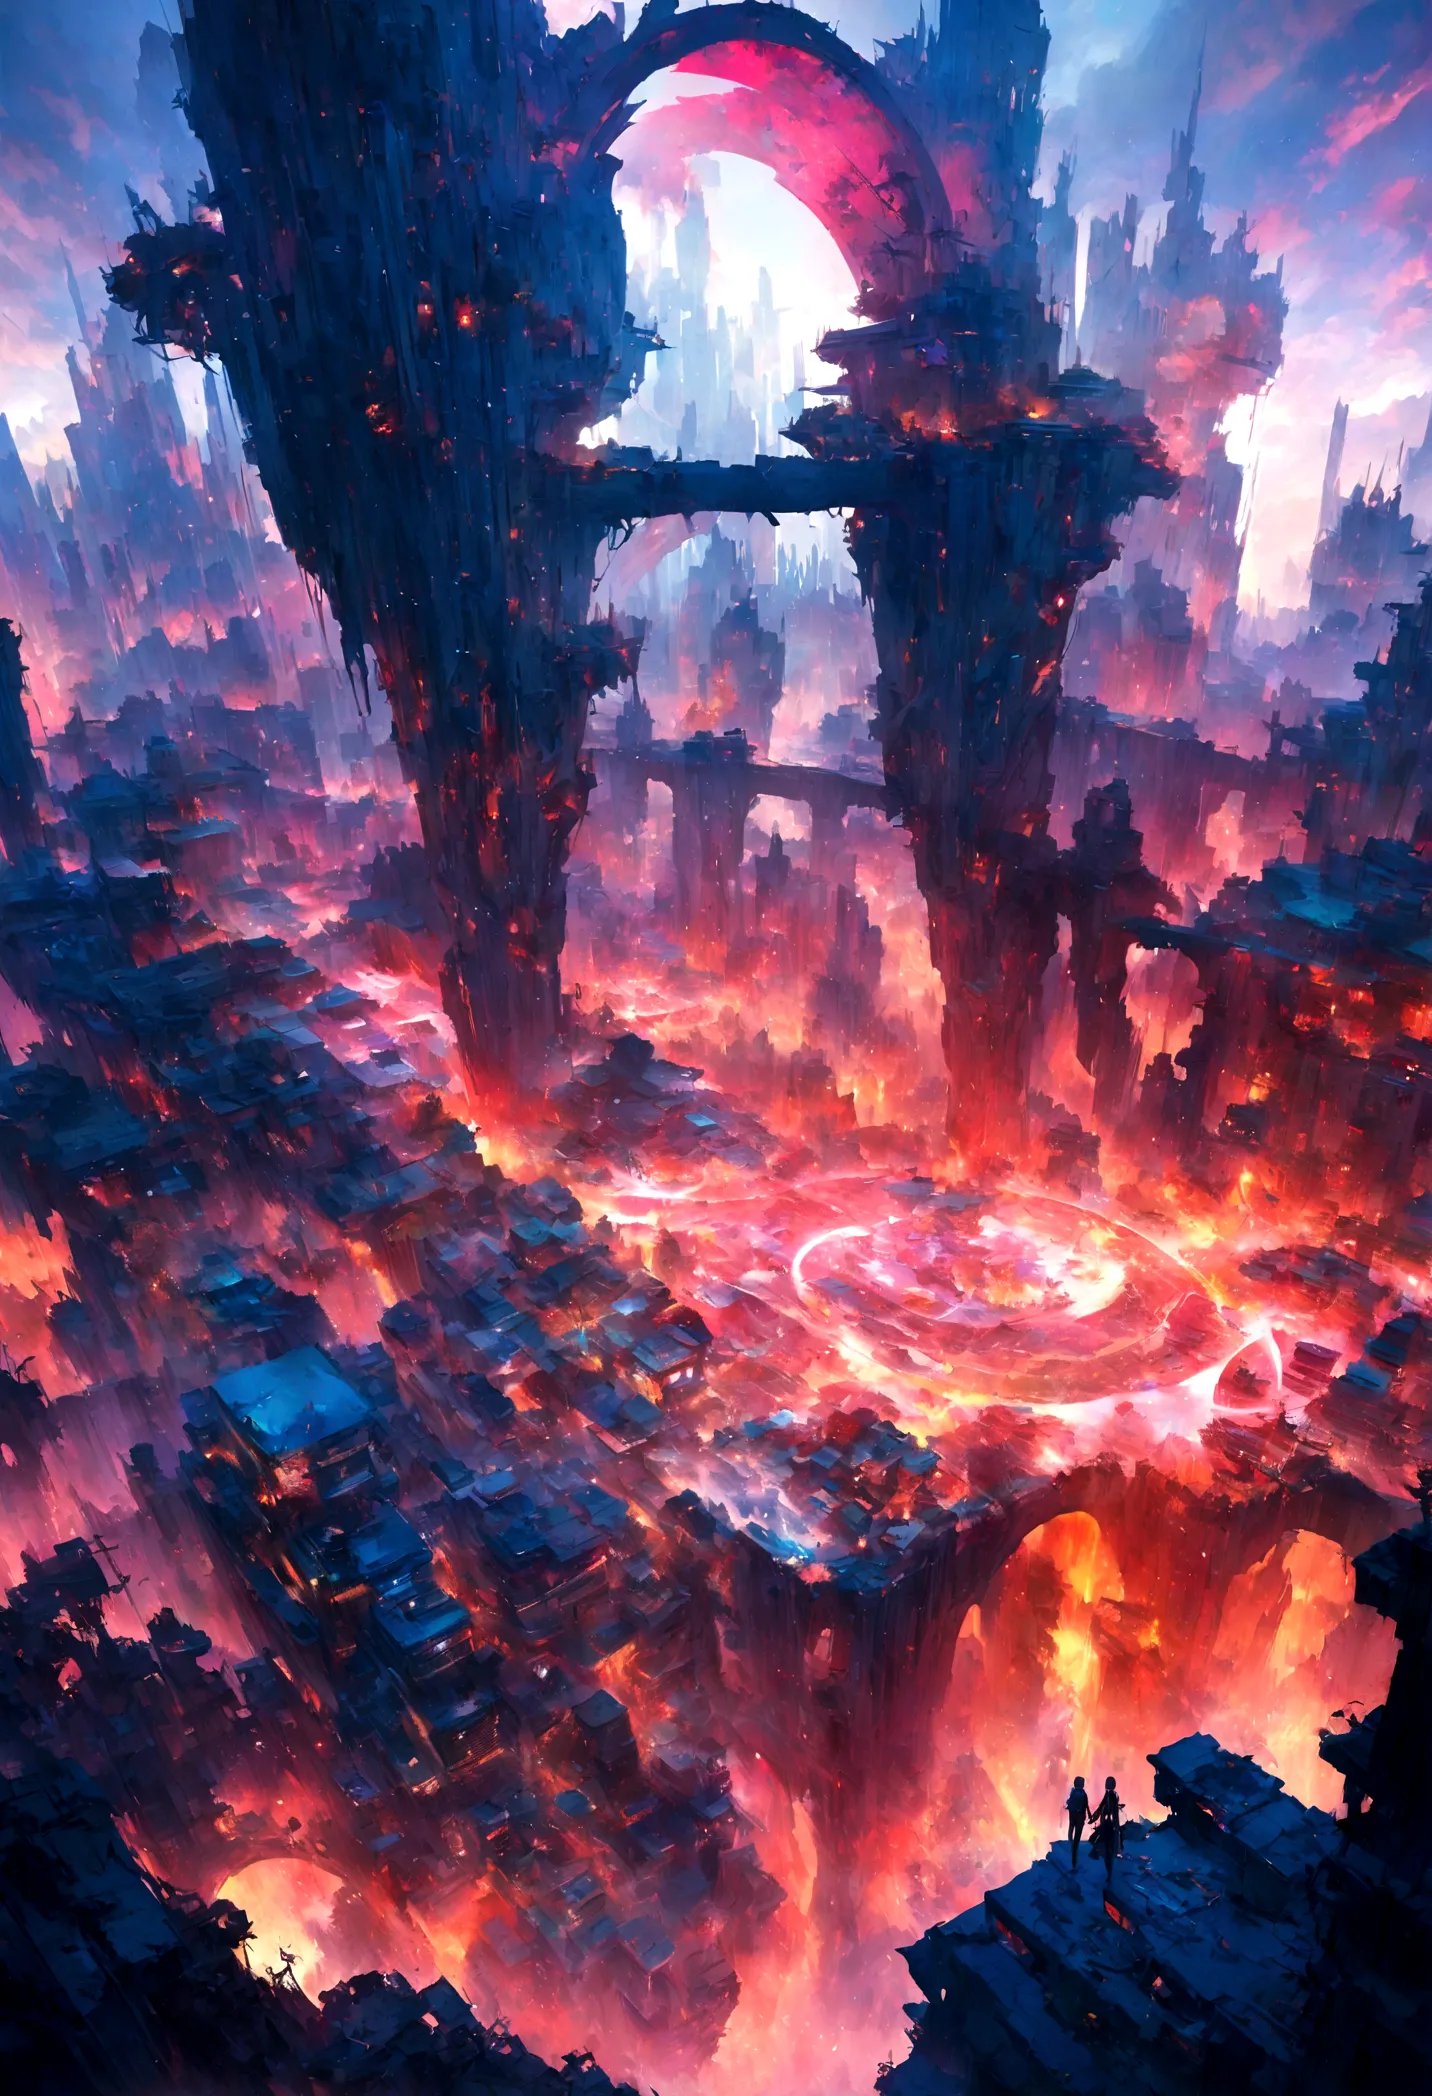 A dystopian cityscape comes to life in a mesmerizing tableau, with skyscrapers ablaze and crumbling in the foreground. This vivi...